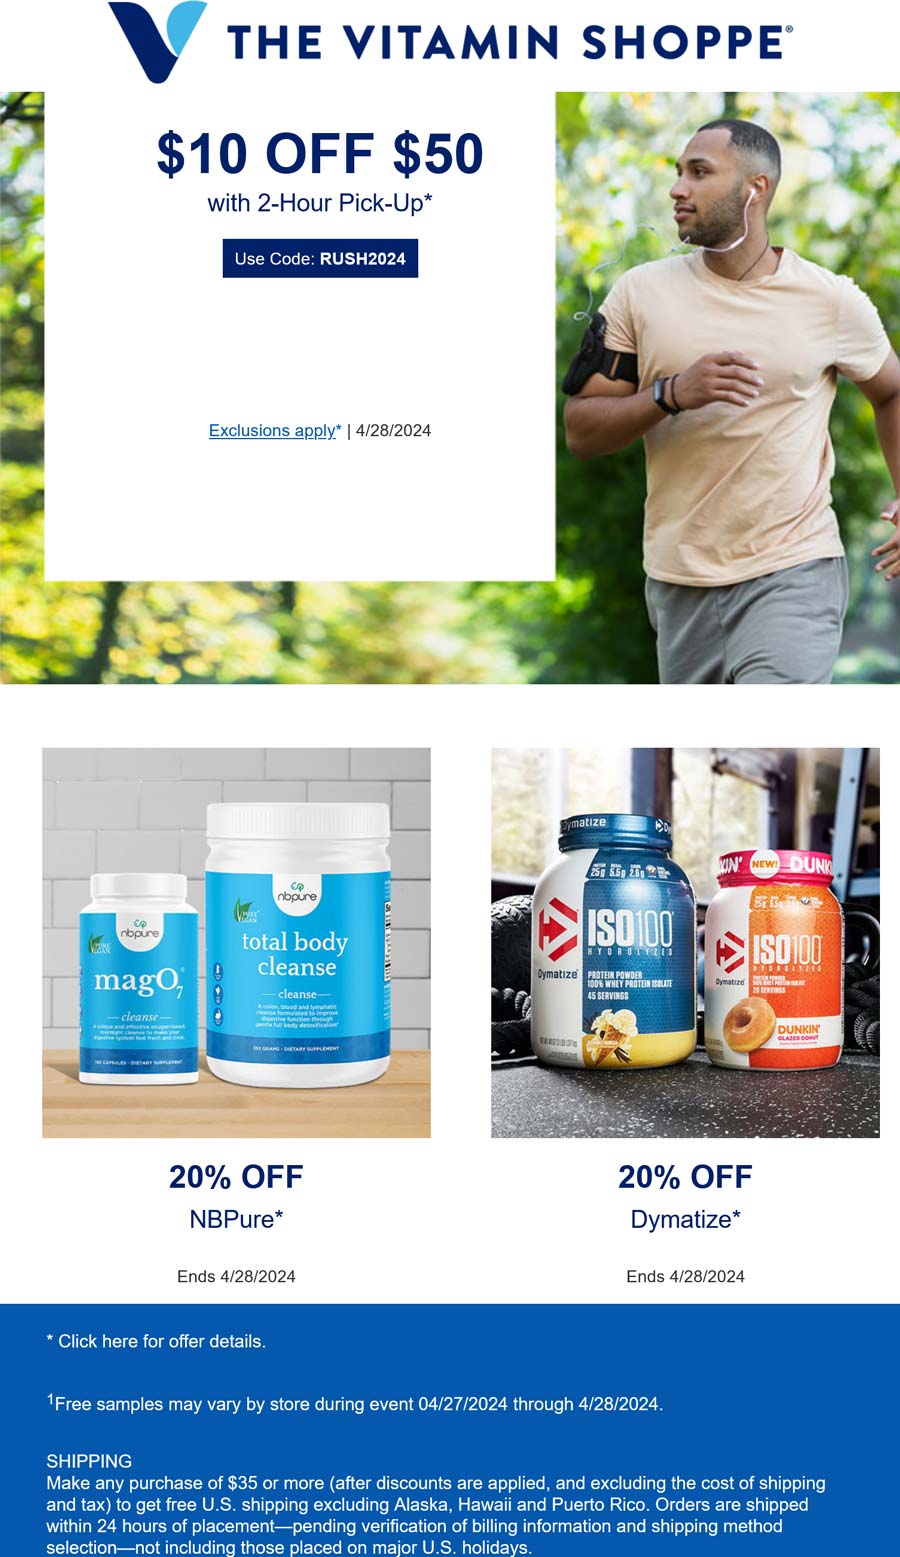 The Vitamin Shoppe stores Coupon  $10 off $50 at The Vitamin Shoppe via promo code RUSH2024 #thevitaminshoppe 